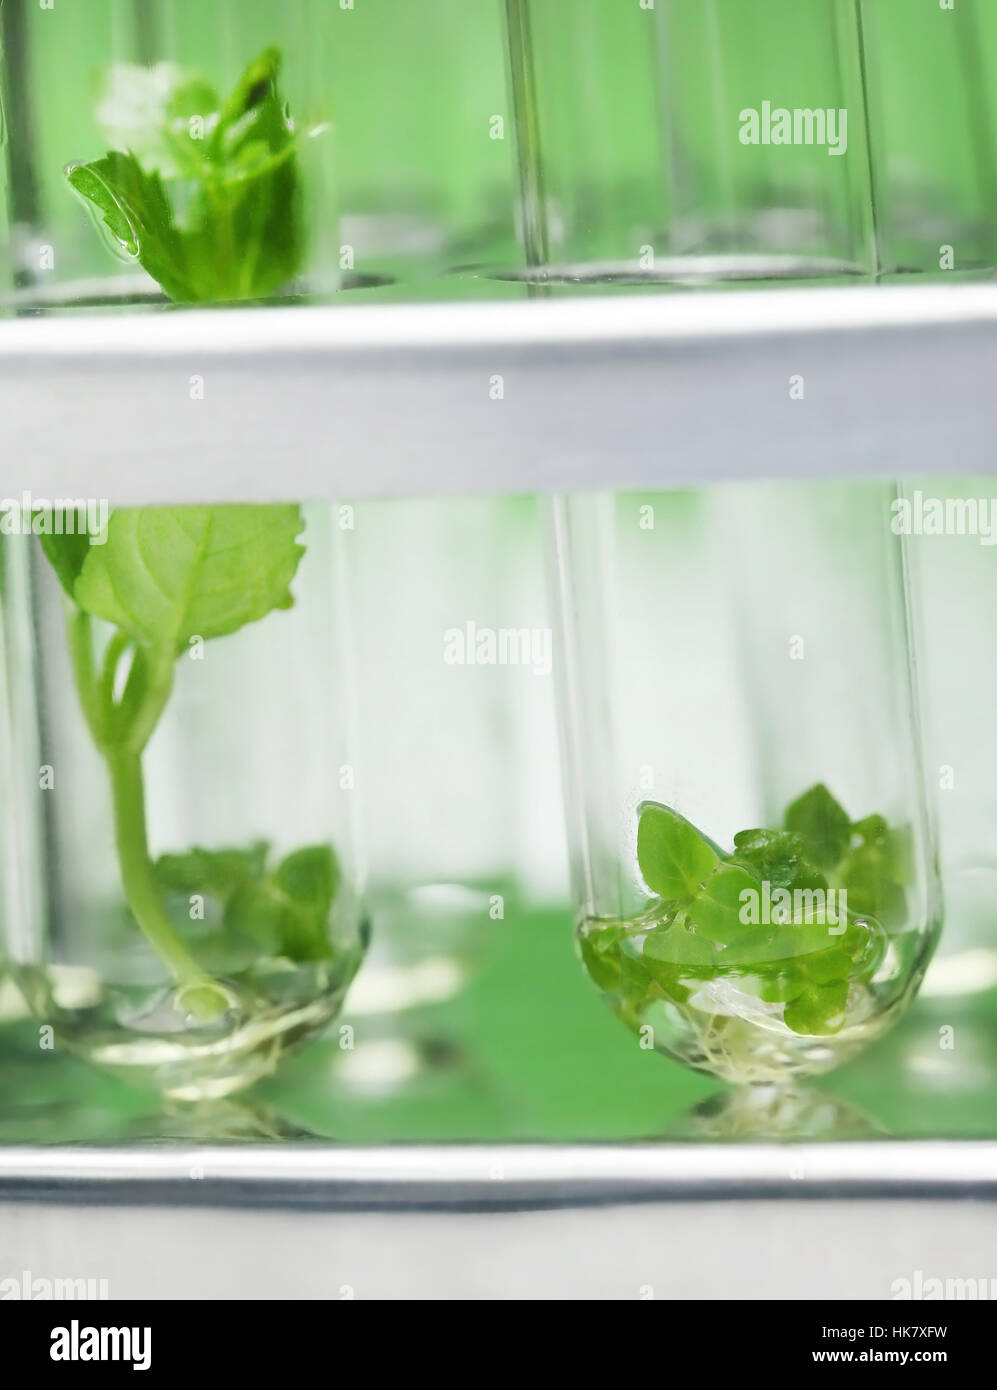 Tissue culture concept with plants in test tubes Stock Photo